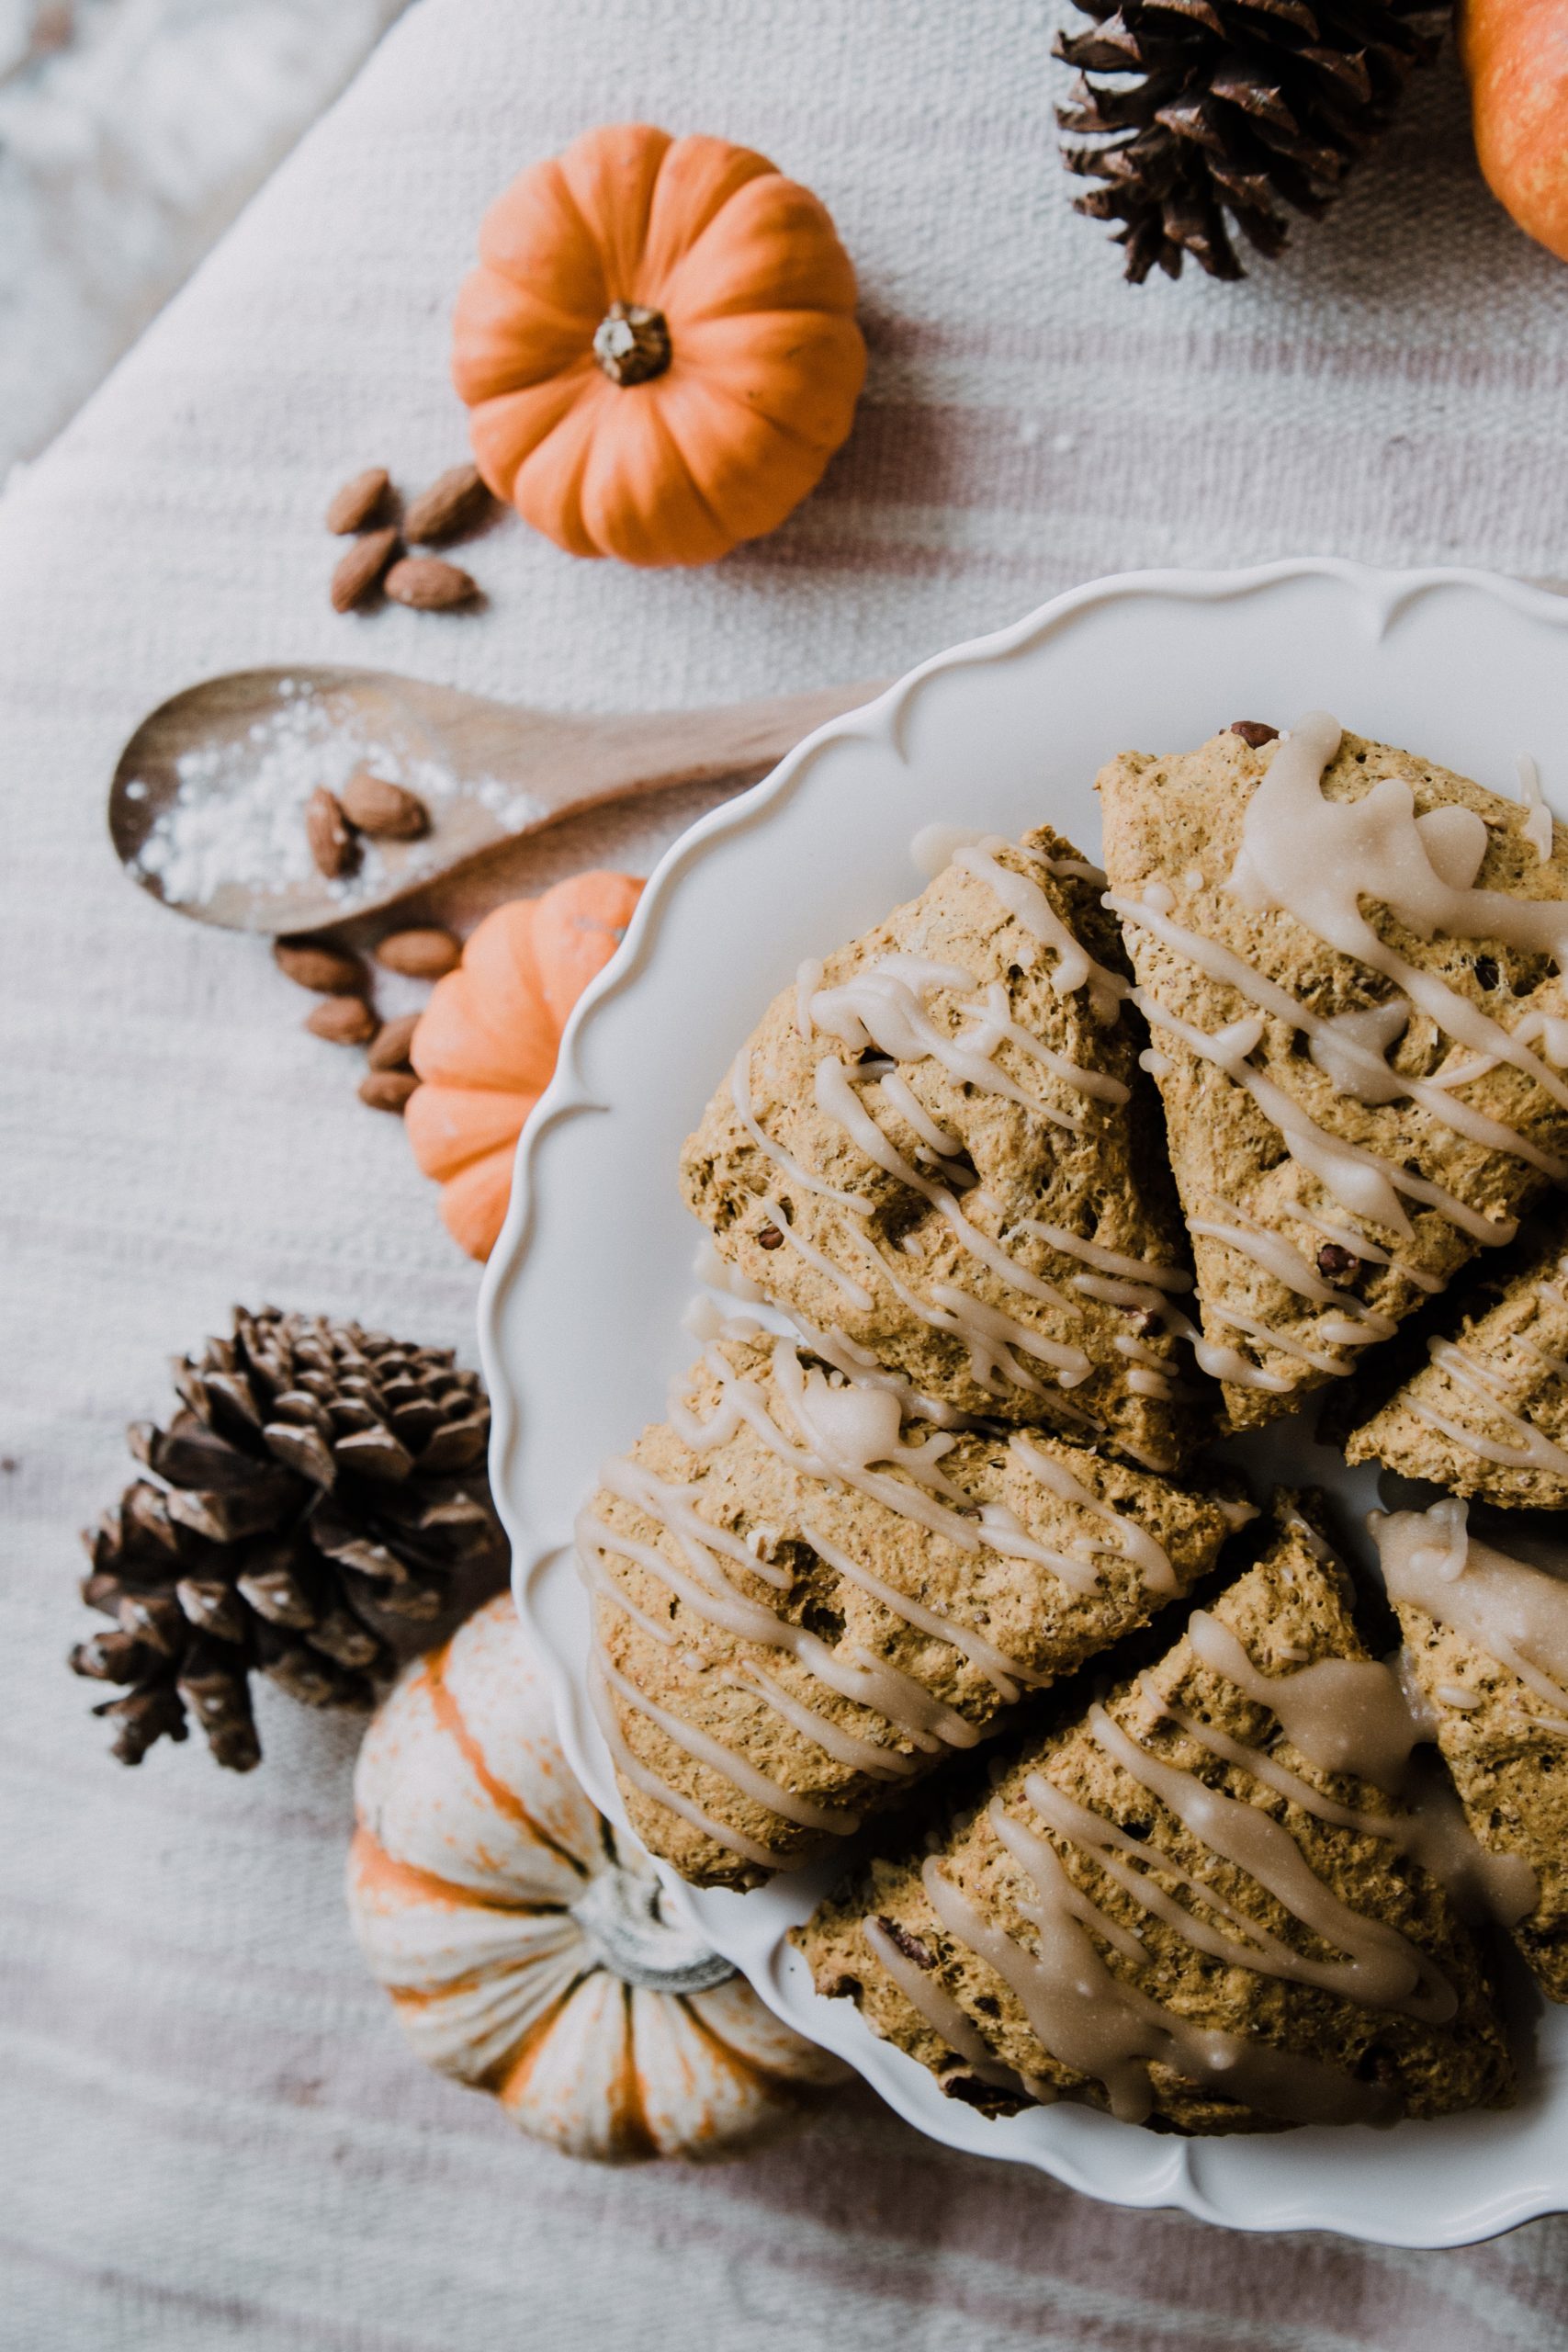 Healthy Fall Baked Goods